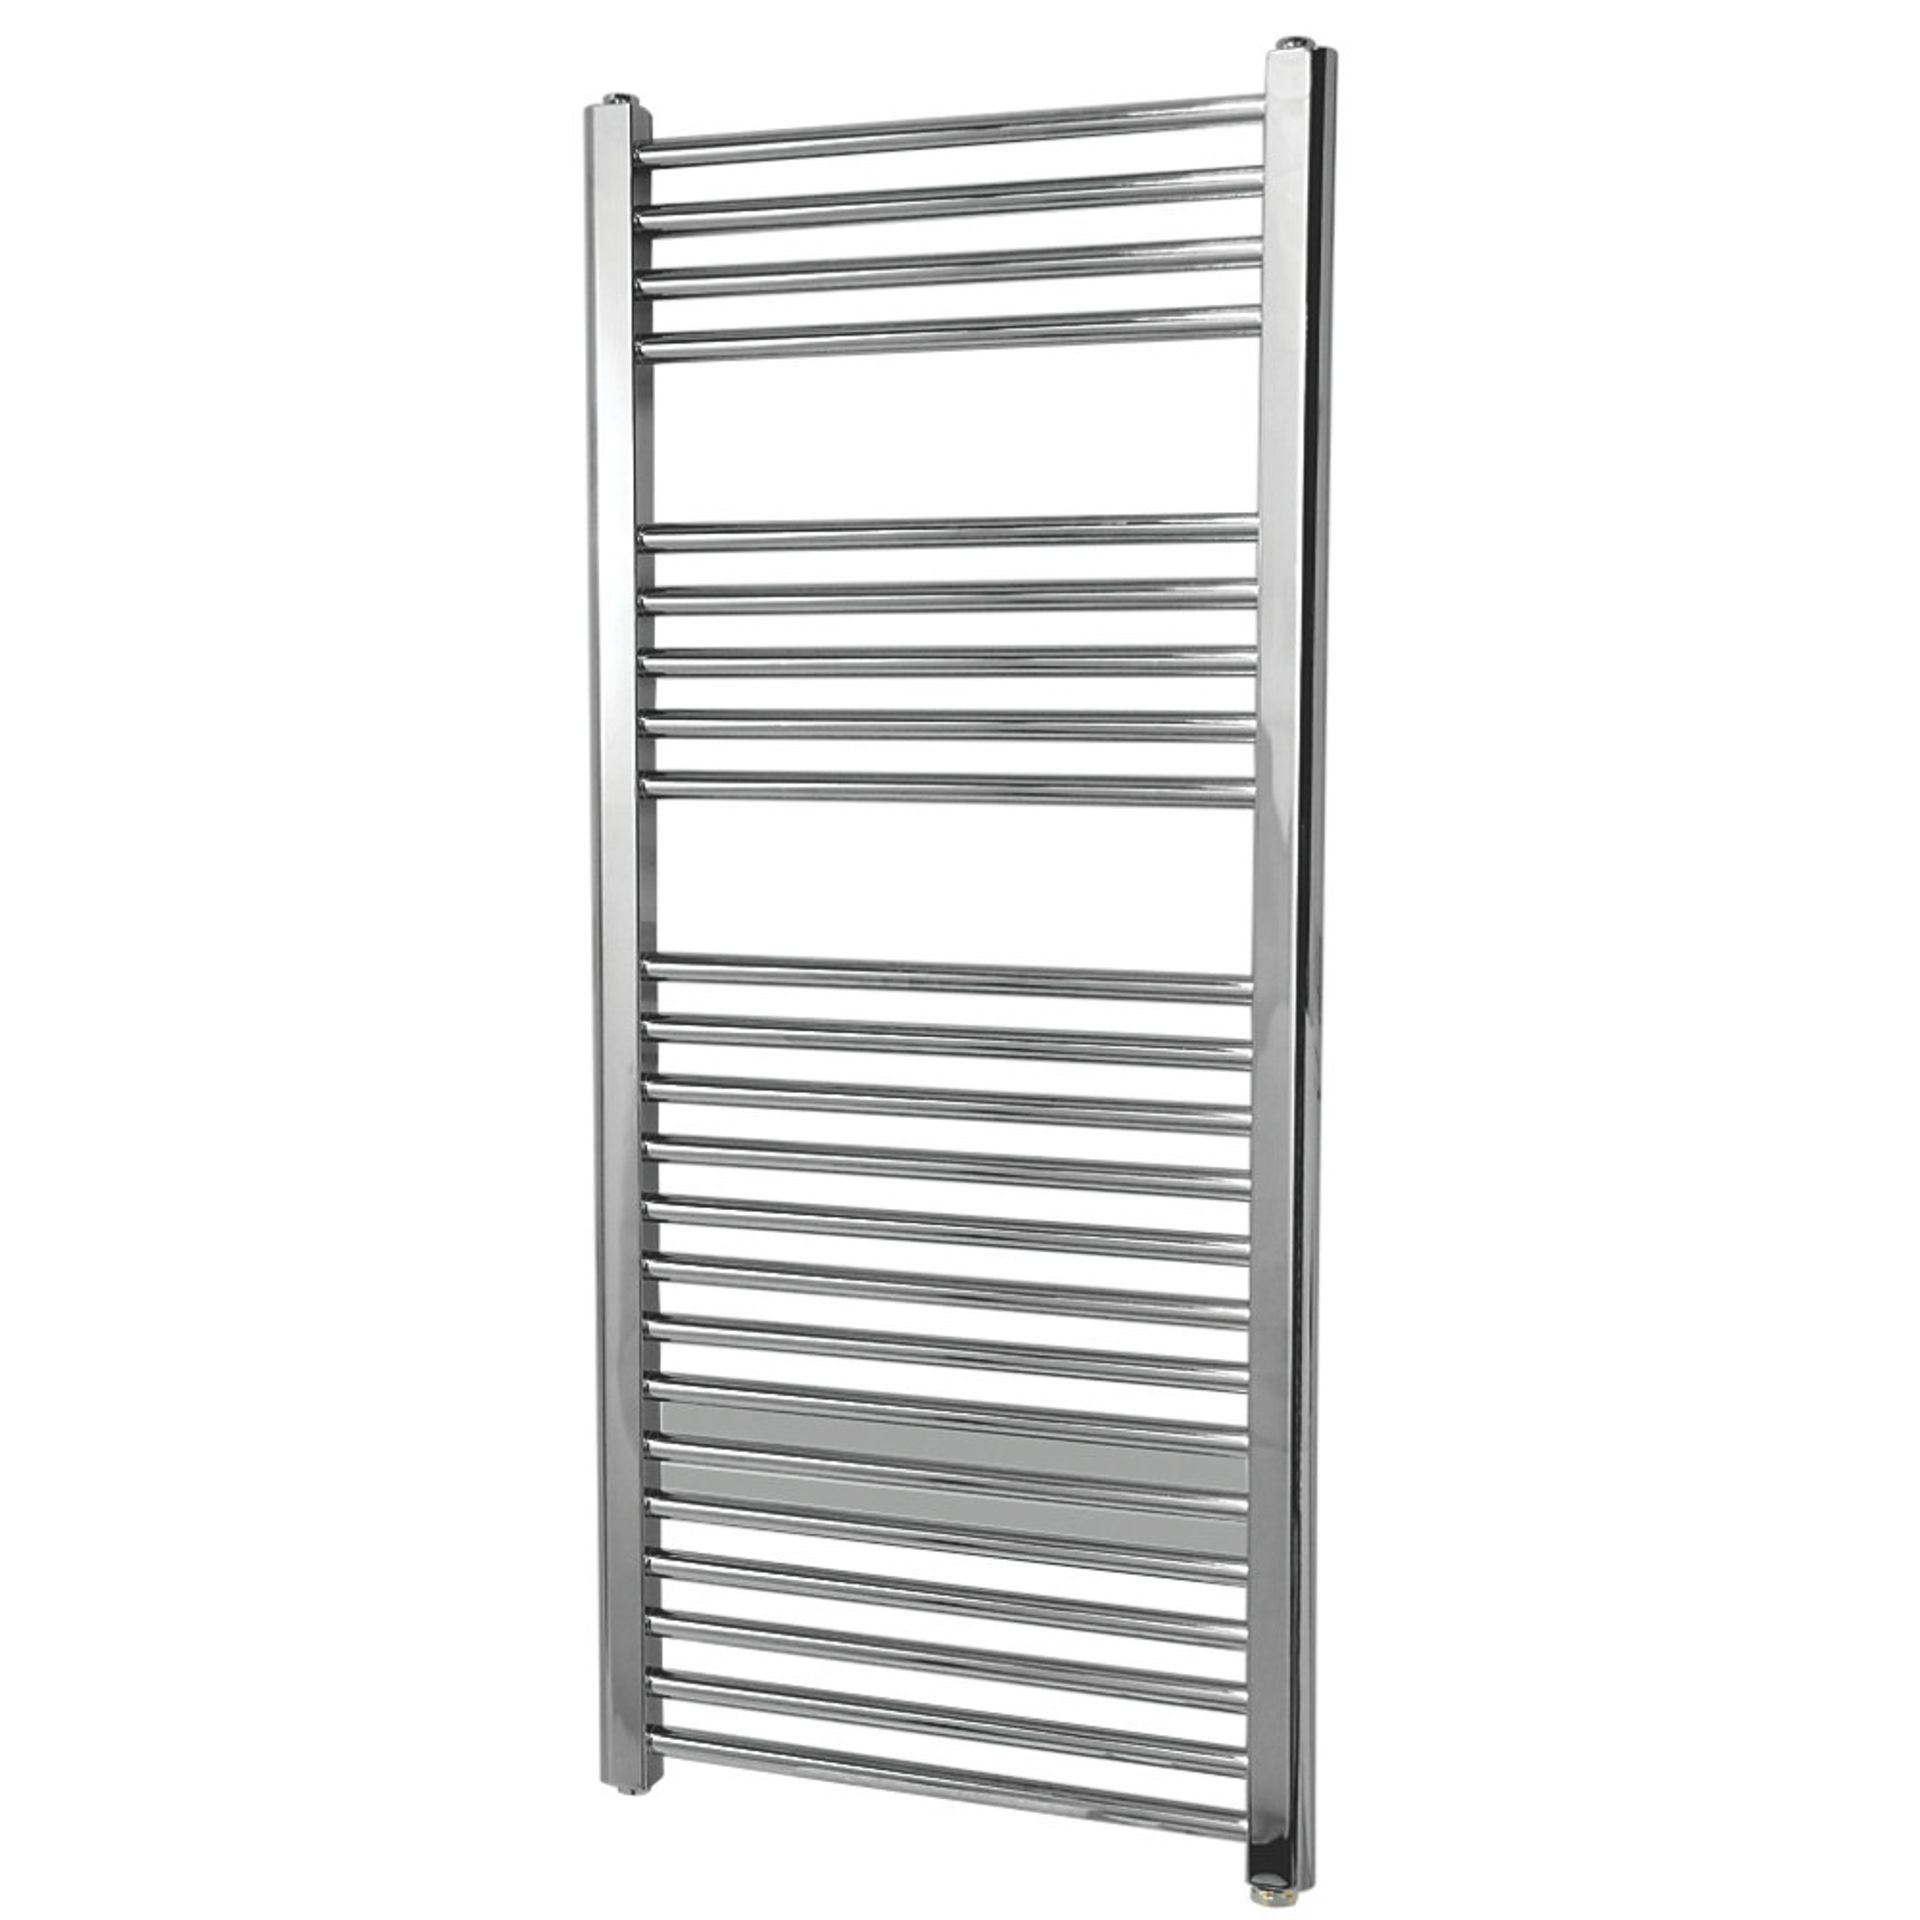 (H6) 1100x500mm FLOMASTA FLAT ELECTRIC TOWEL RADIATOR CHROME. Electrical installation only. Ele... - Image 4 of 5